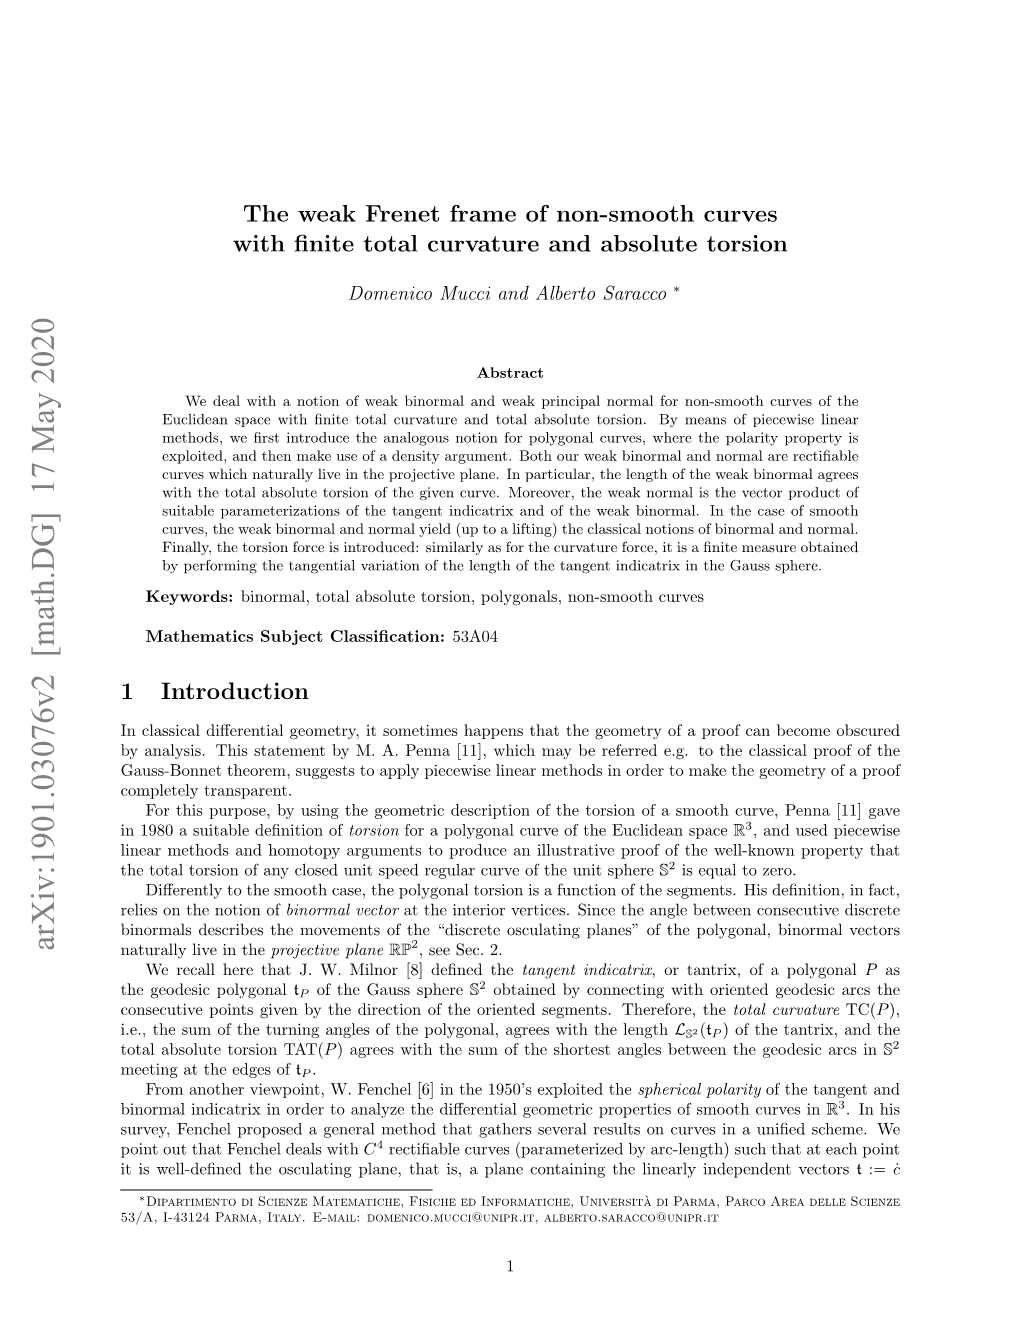 The Weak Frenet Frame of Non-Smooth Curves with Finite Total Curvature And